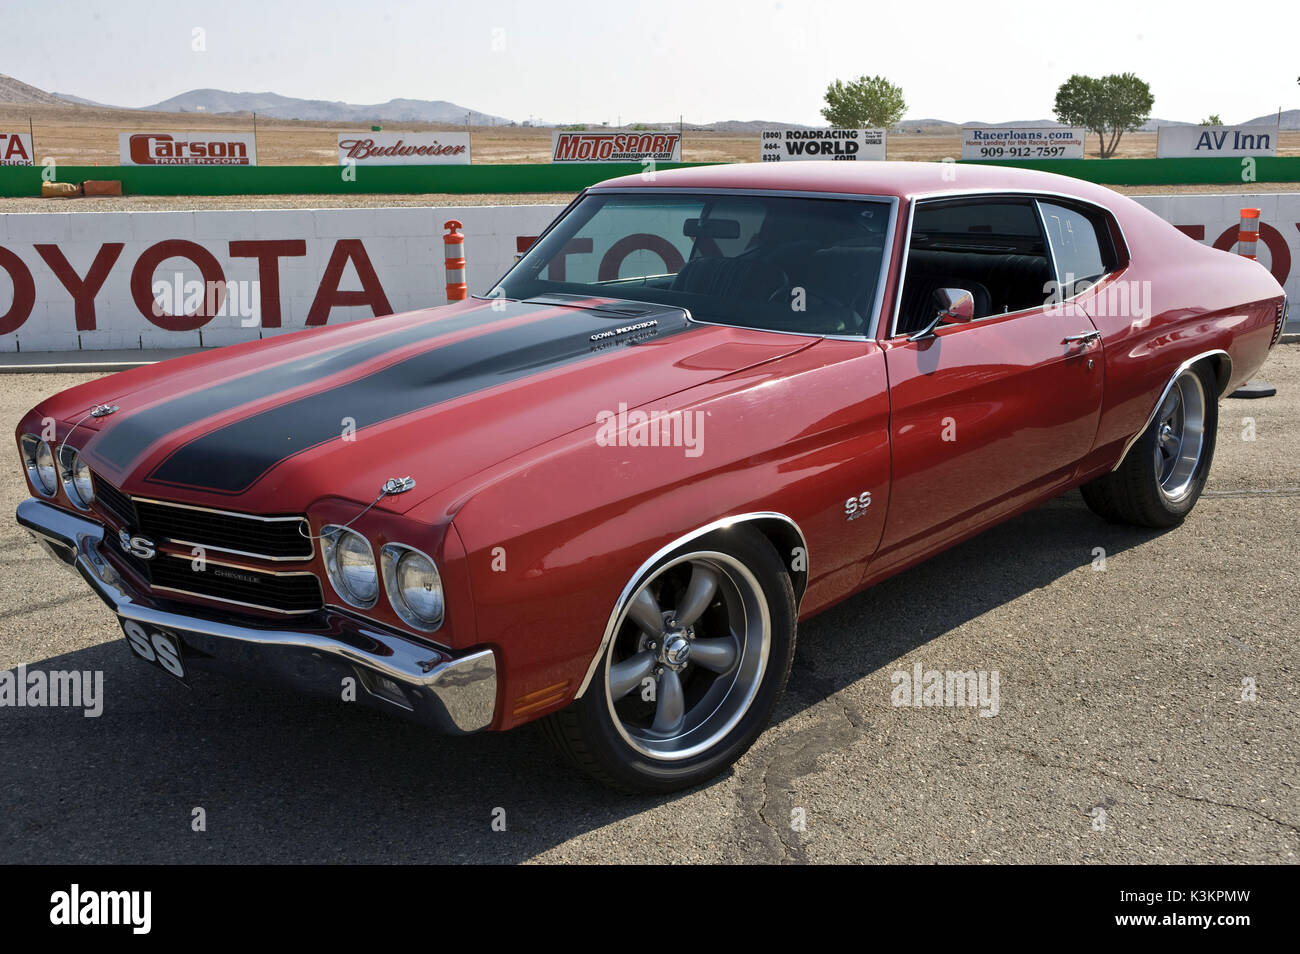 FAST & FURIOUS [US 2009] alias FAST & FURIOUS 4 Dom Toretto's 1970 Red Chevy Chevelle data: 2009 Foto Stock